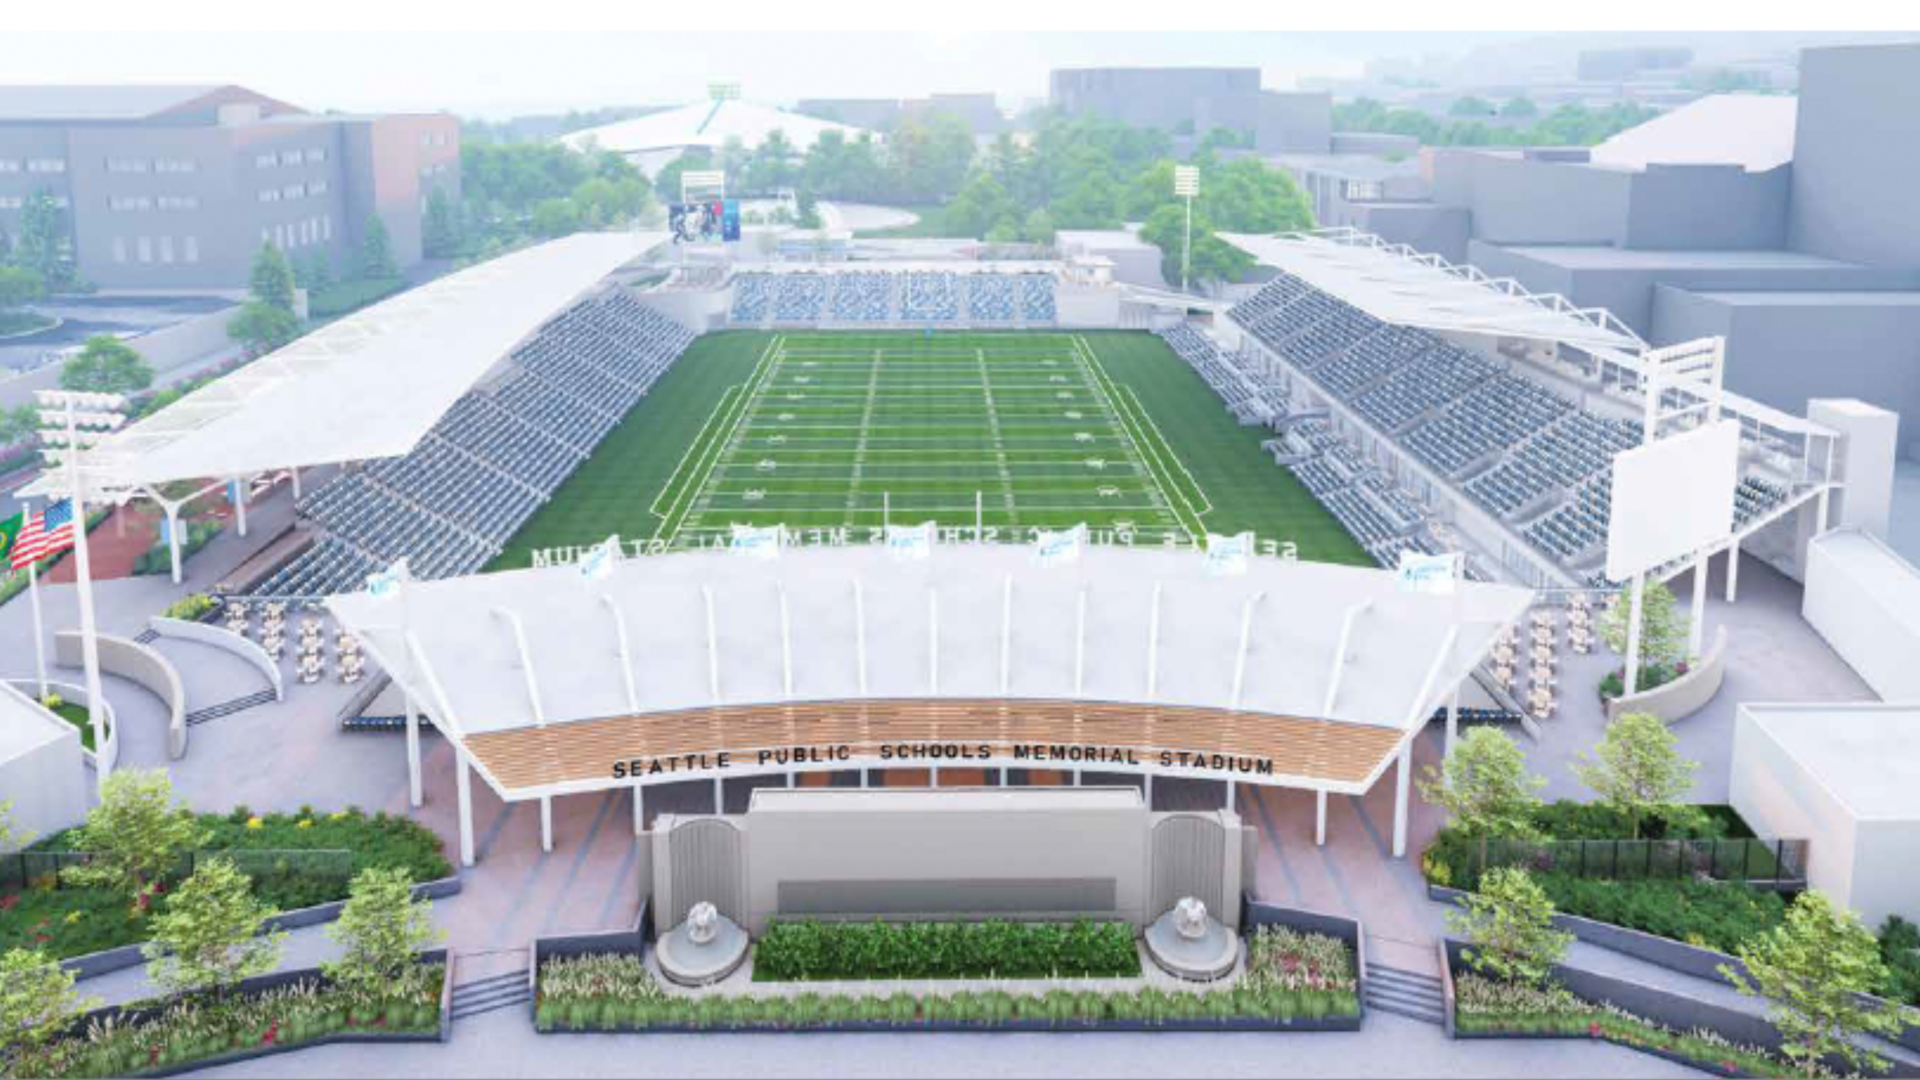 A rendering of what a renovated Memorial Stadium may look like, with covered stadium seating and a long green field.